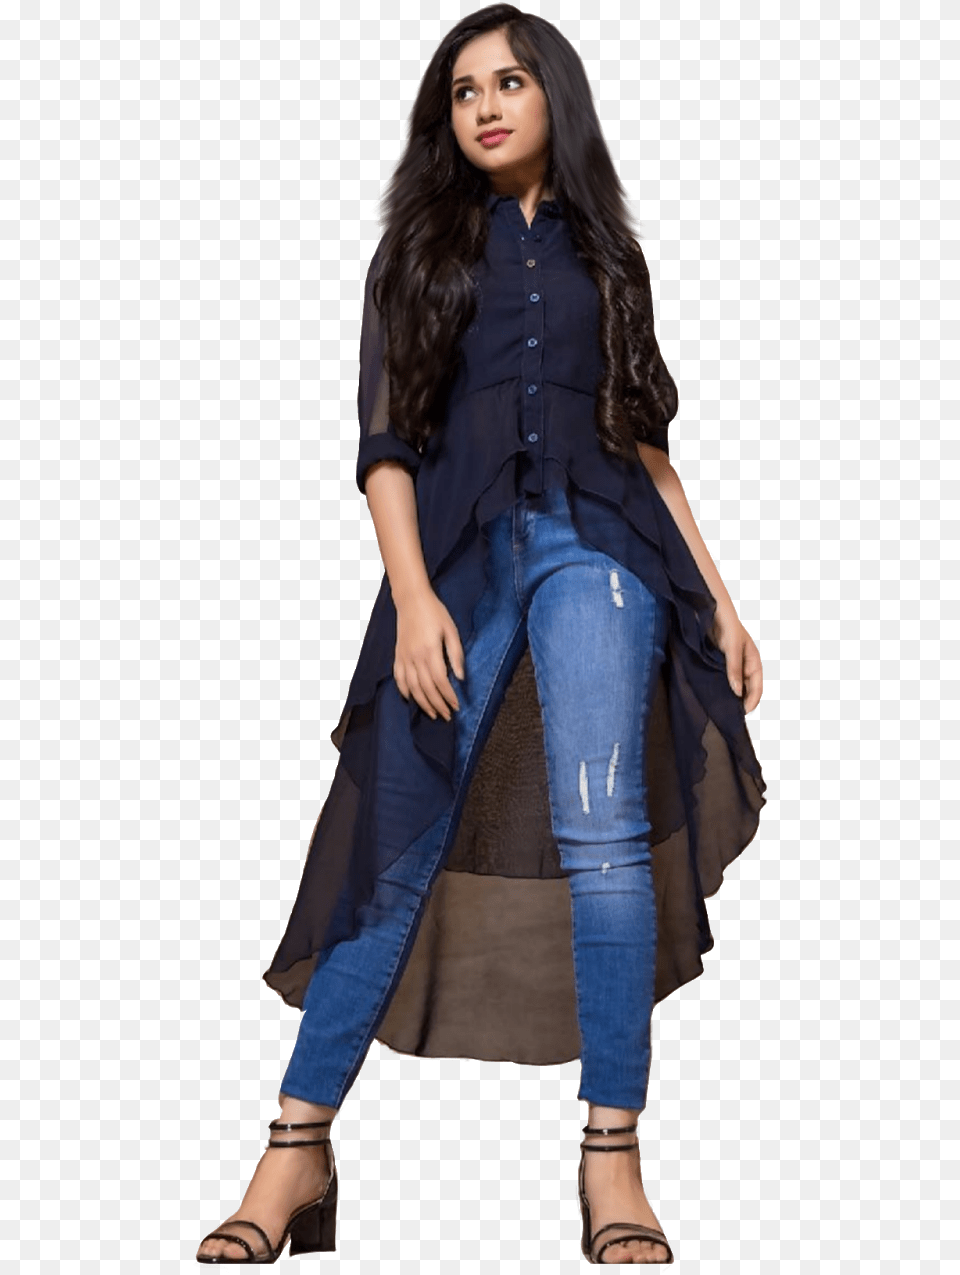 Indian Cb Girl, Jeans, Blouse, Clothing, Sandal Png